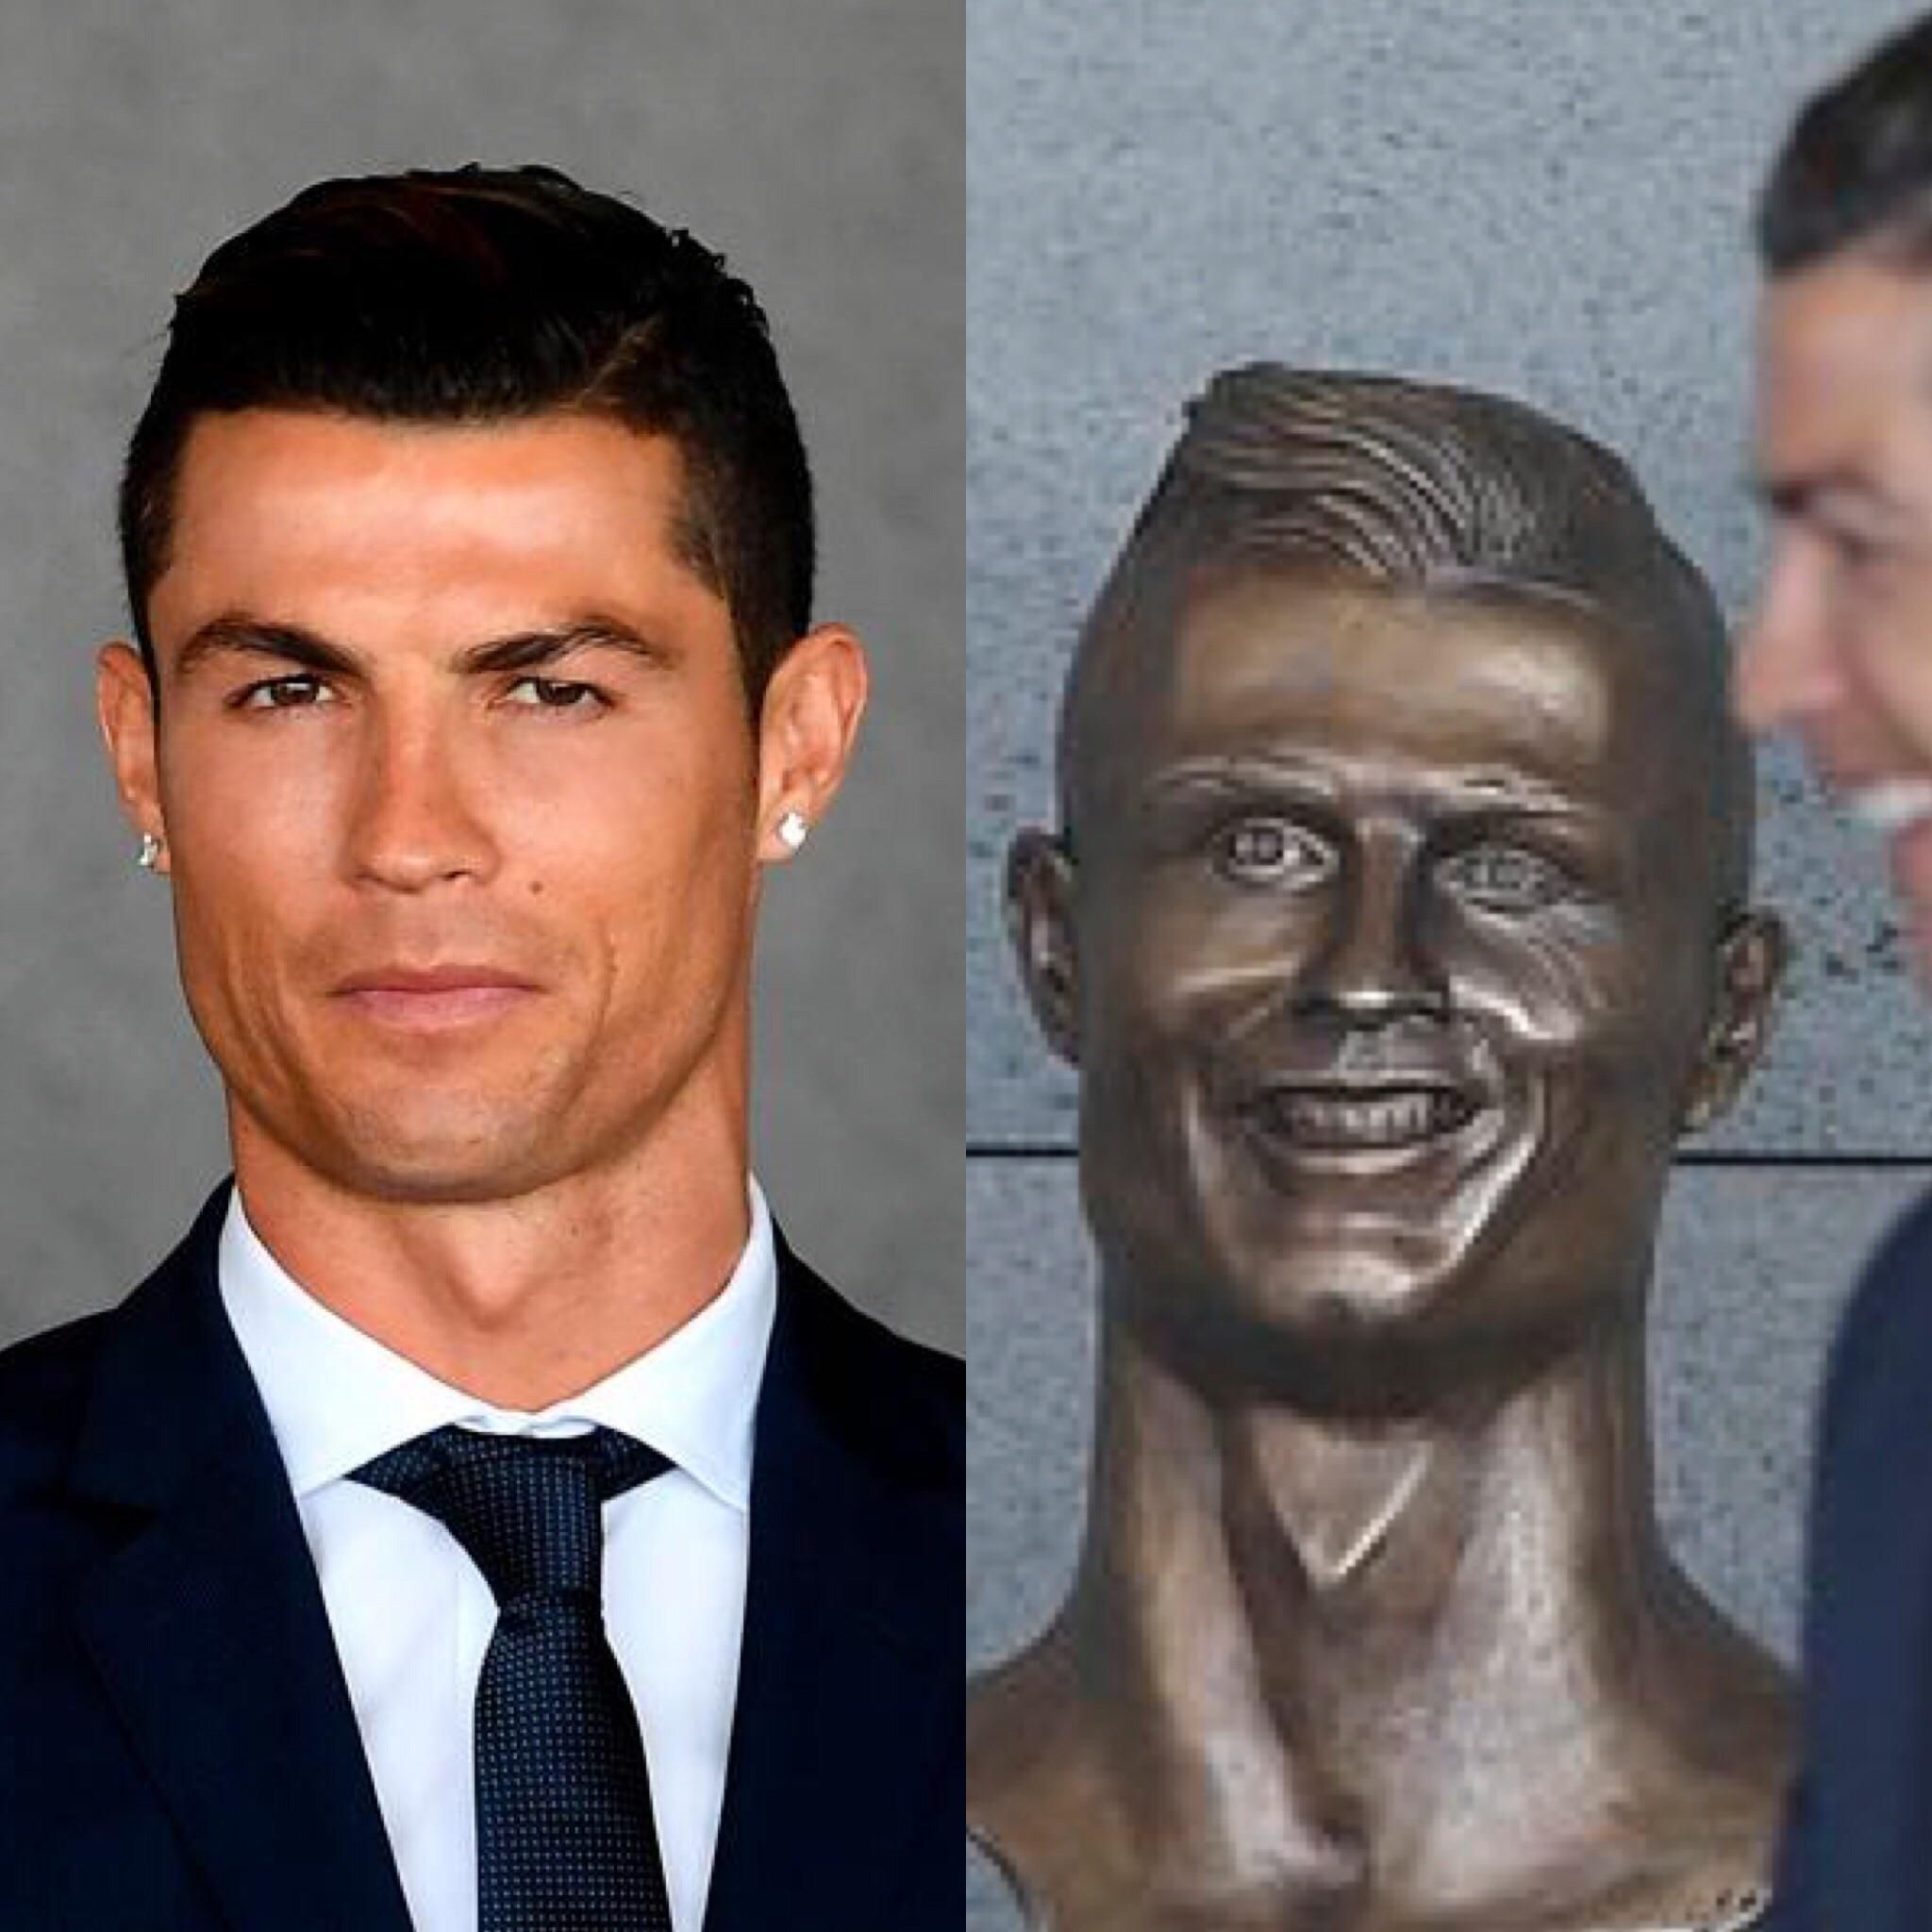 Cristiano Ronaldo's new bust at an airport named after him